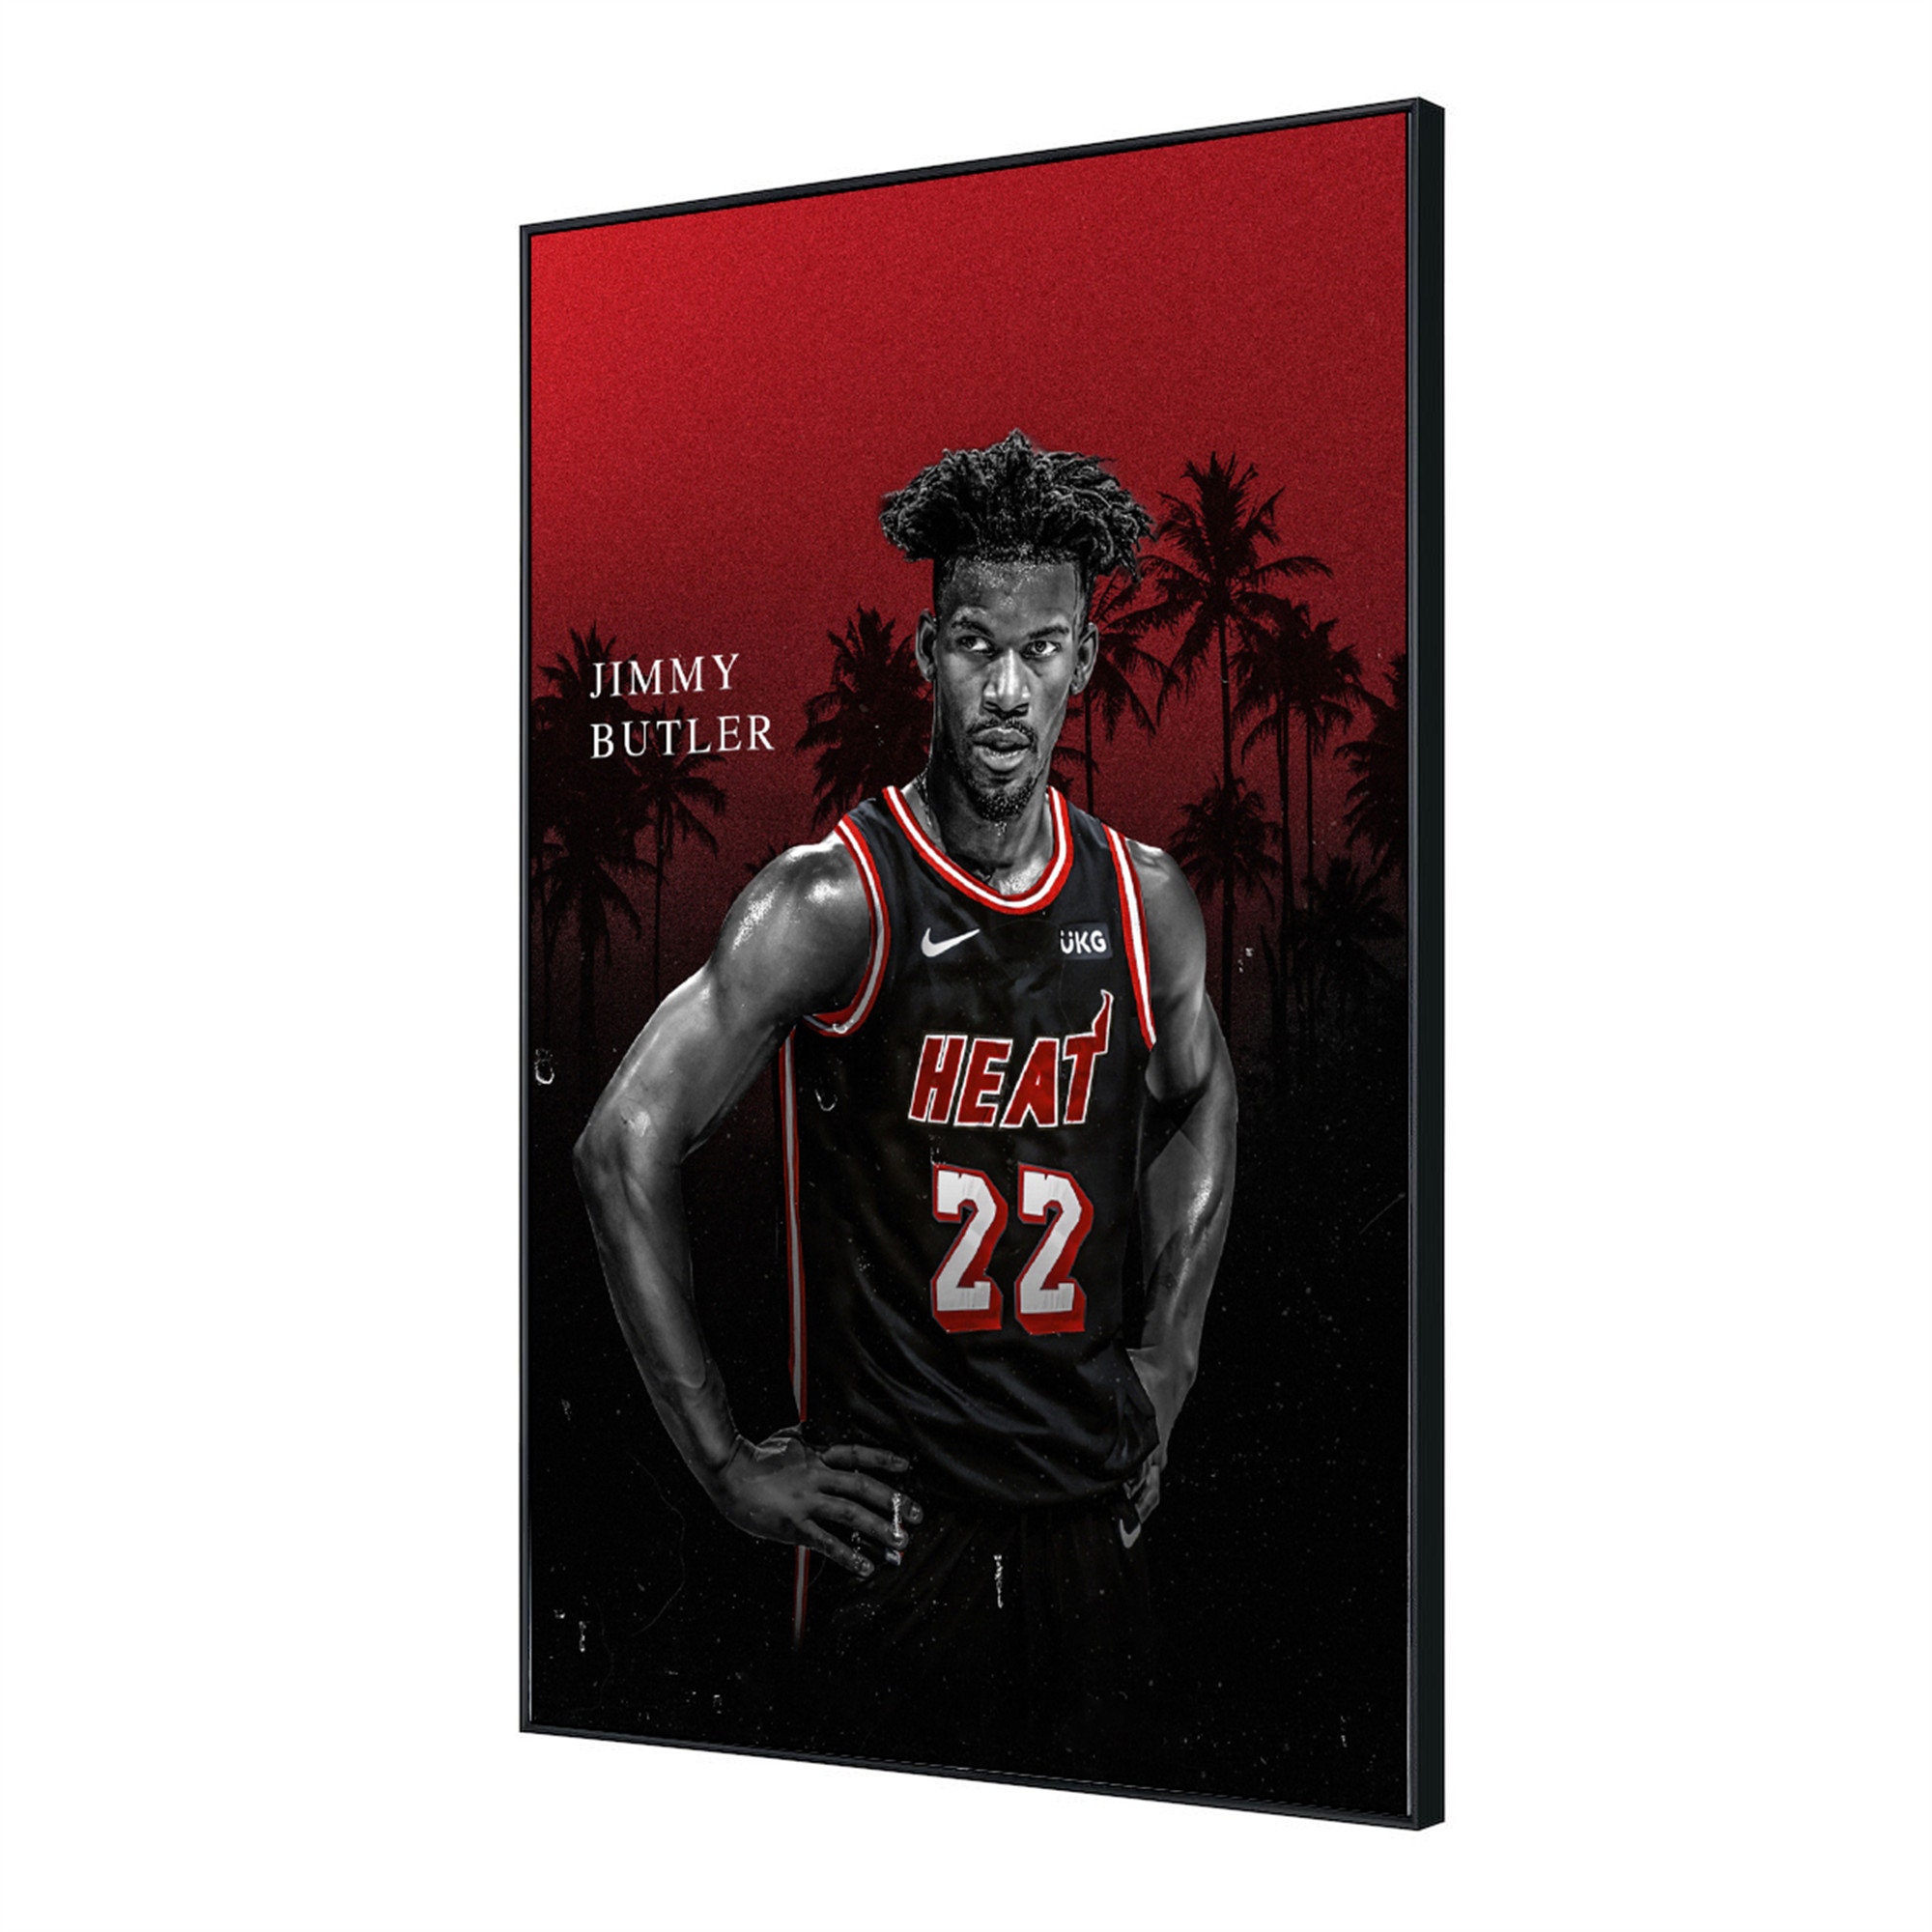 Download Jimmy Butler Red Stylistic Poster Wallpaper